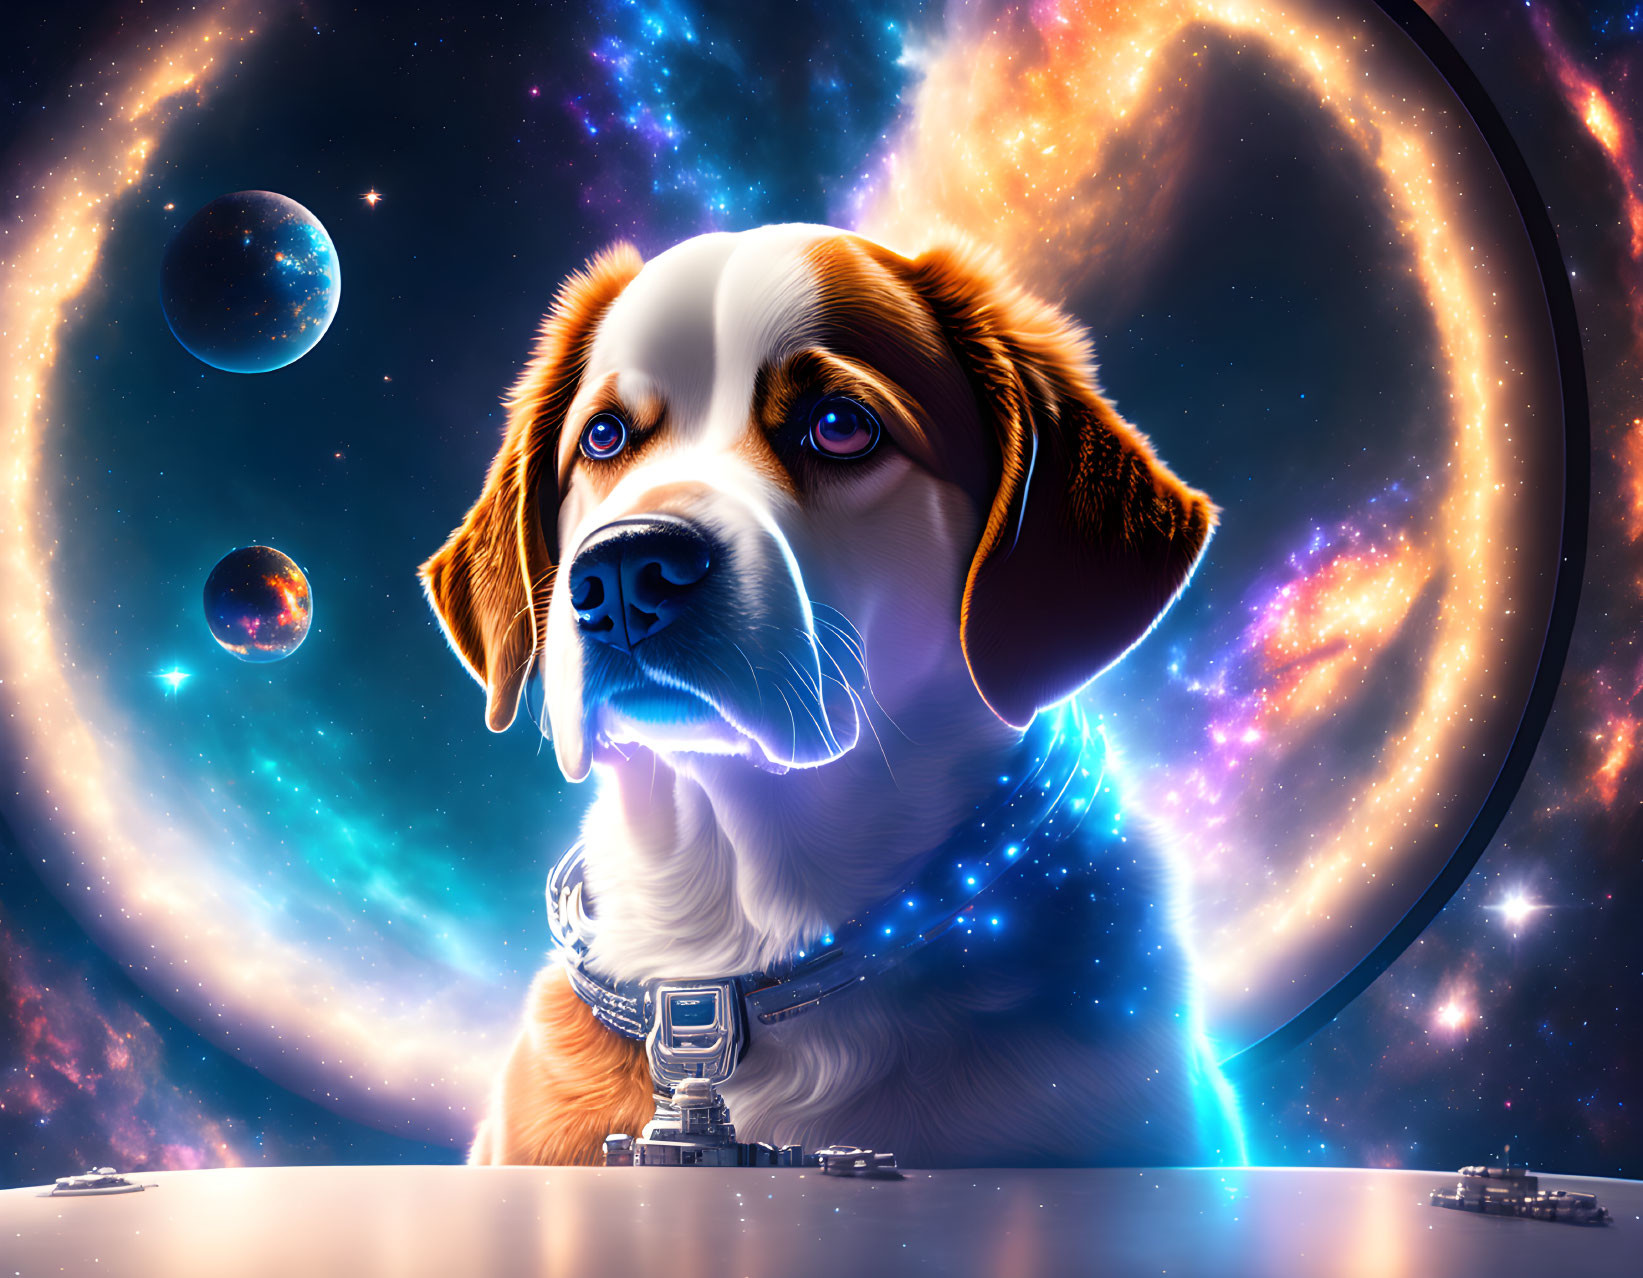 Whimsical dog artwork with futuristic collar on cosmic background